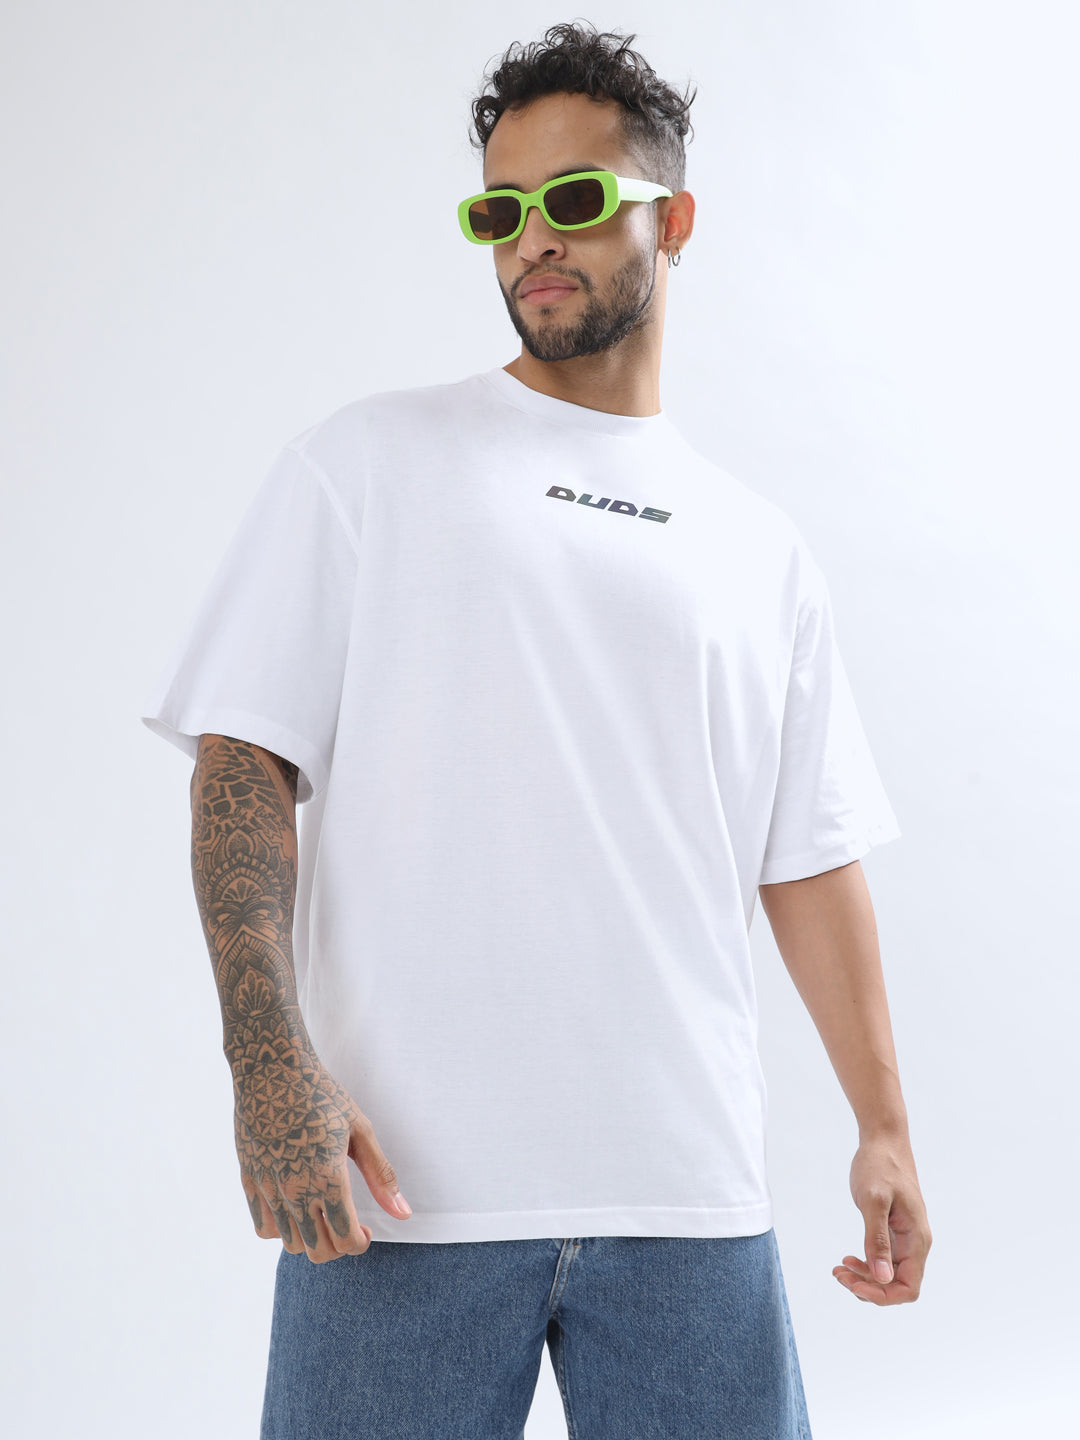 My Muse Over-Sized T-Shirt (White) - Wearduds